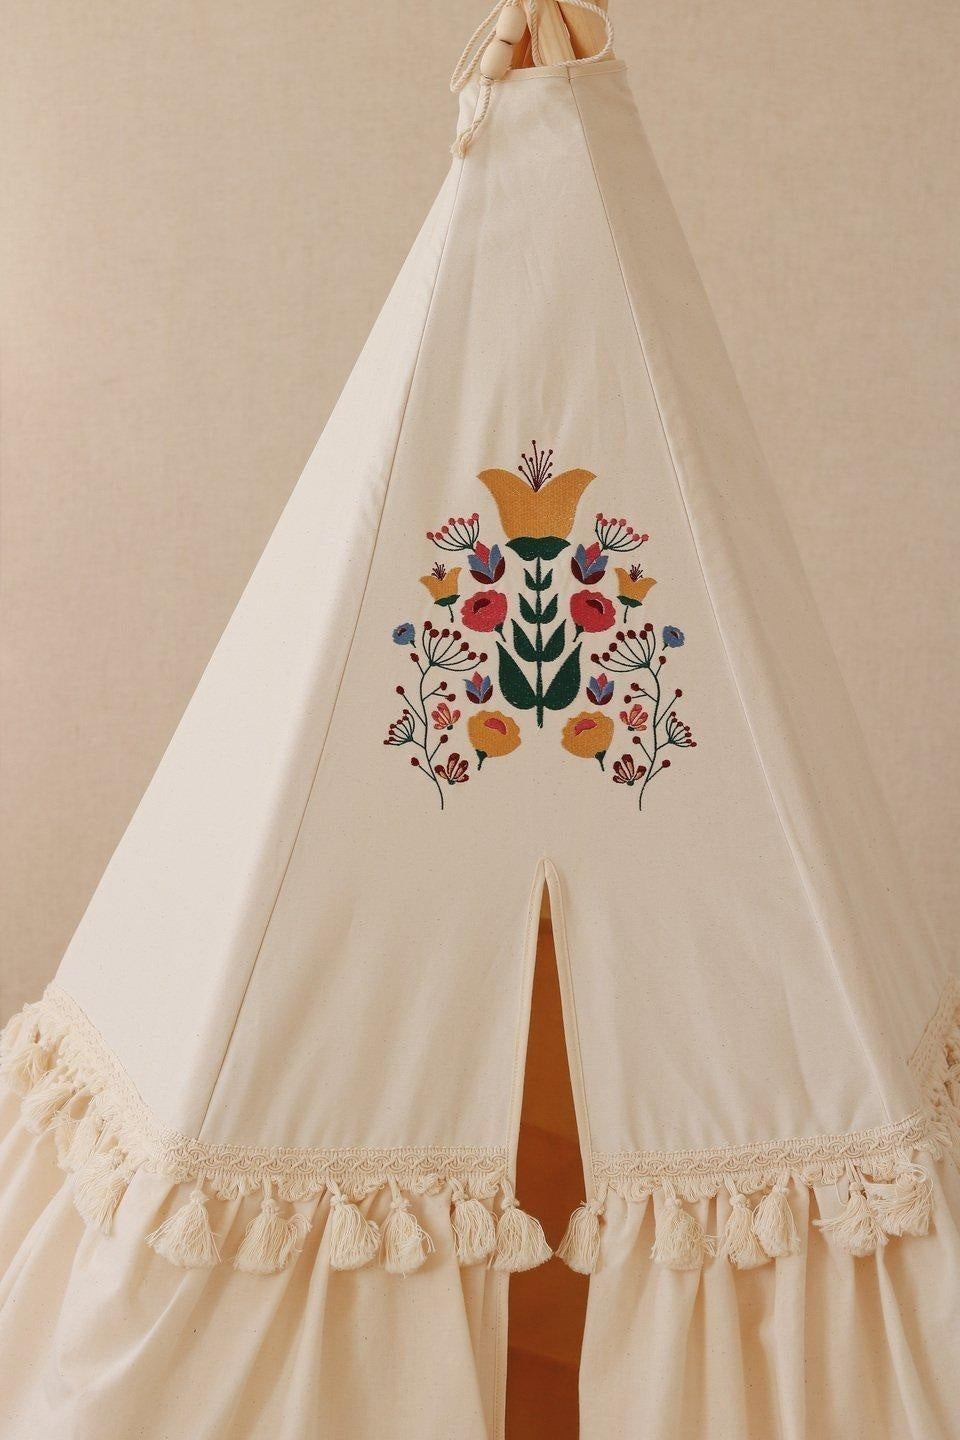 Teepee Tent "Folk" with Frills and Embroidery - Sumiye Co